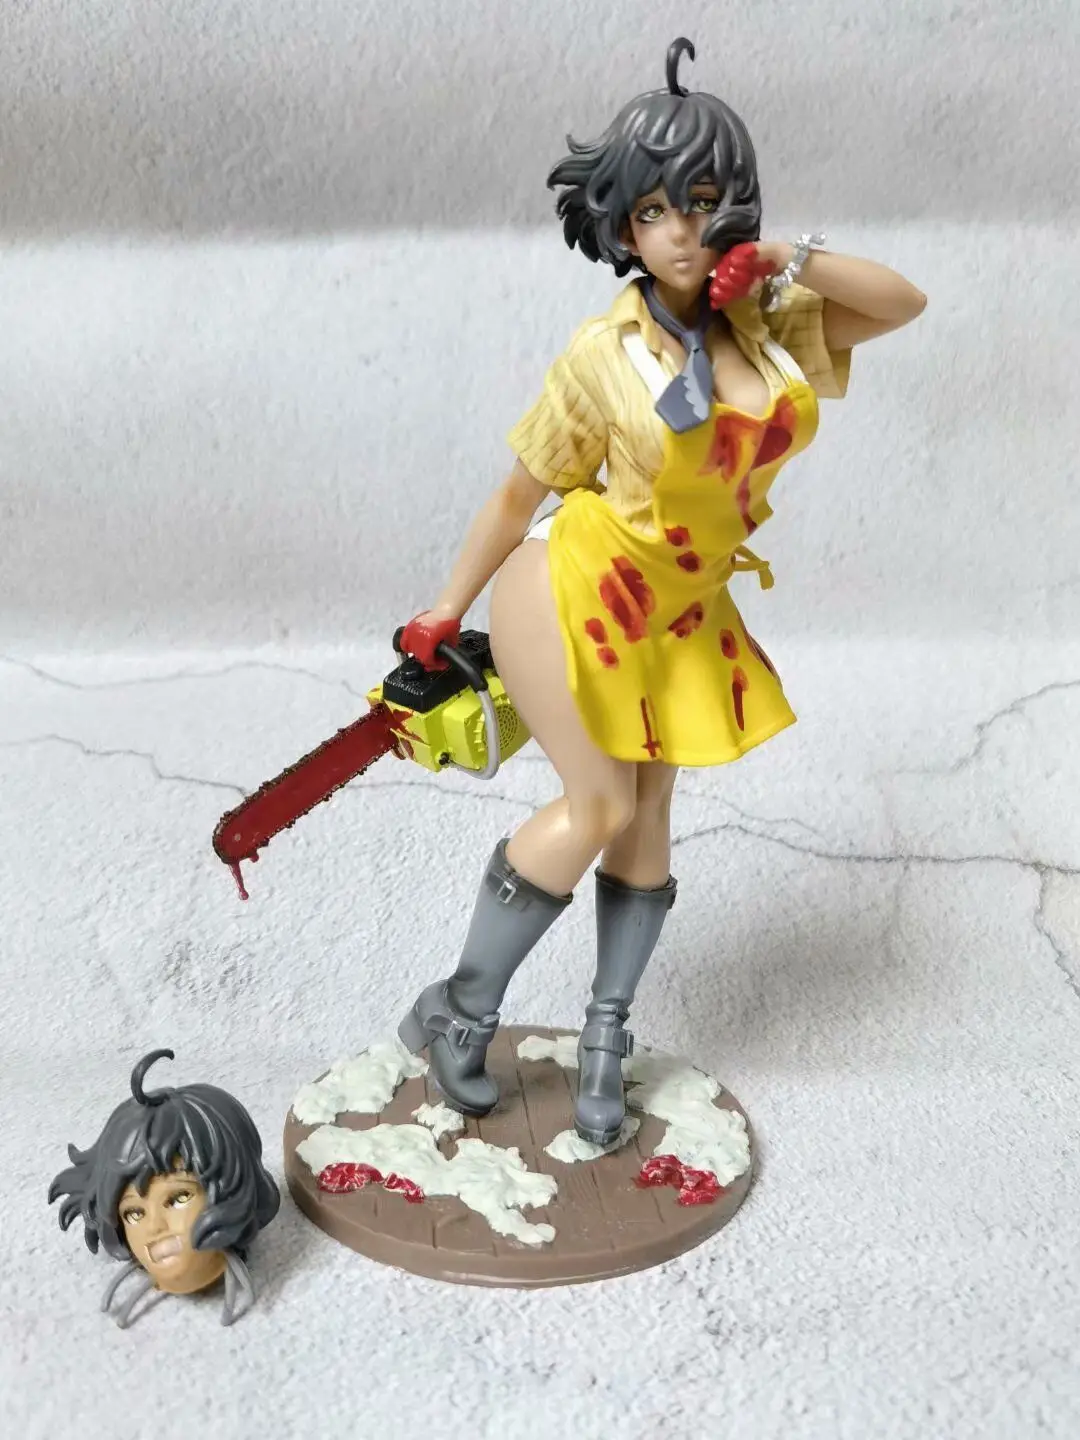 Sacrifice 1974 leatherface bishoujo anime pvc action figure toy game statue collectible thumb200